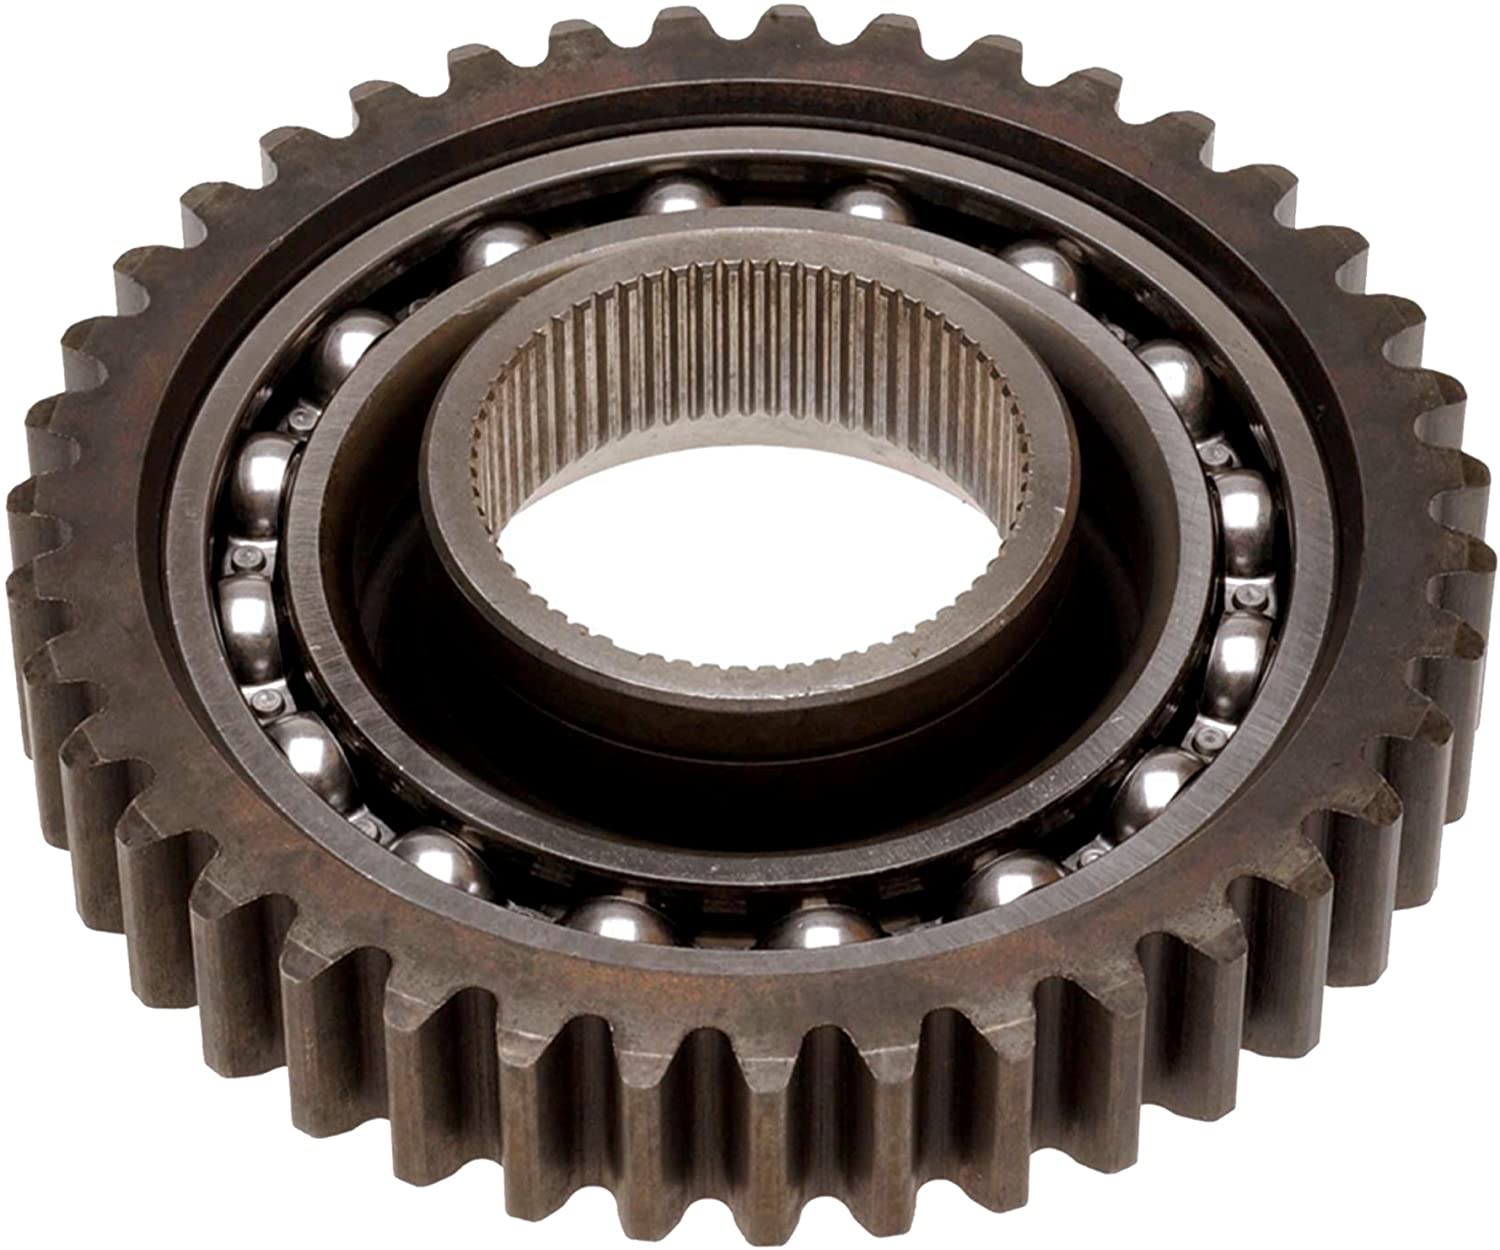 ACDelco 24211130 GM Original Equipment Automatic Transmission Driven Sprocket with Bearing